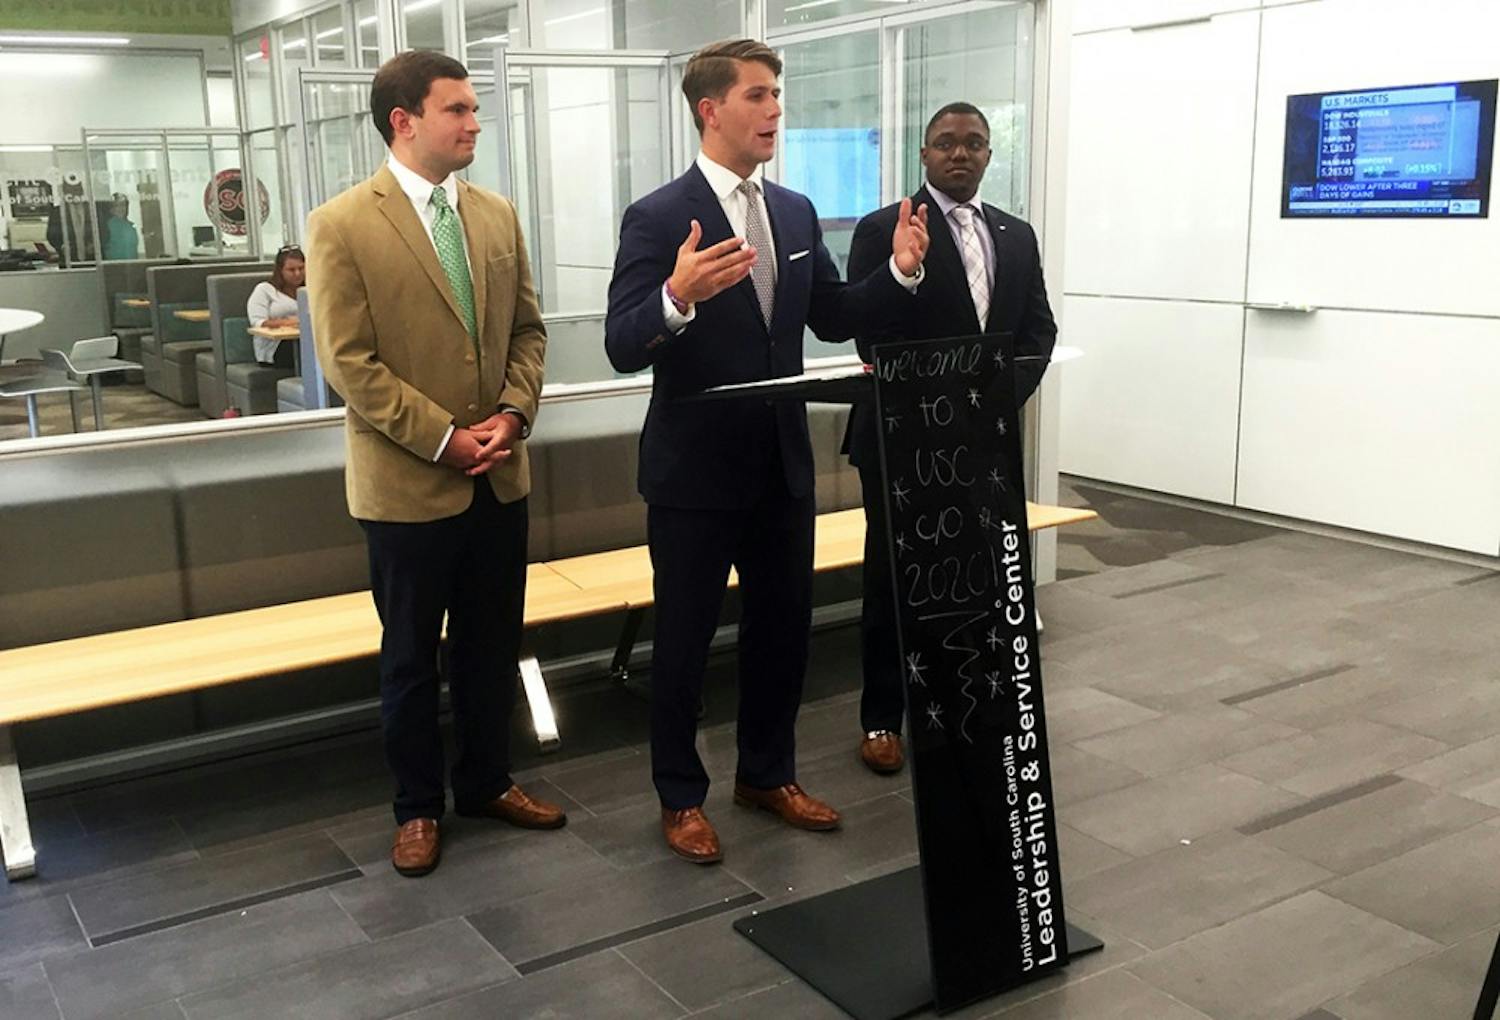 Student Body President Michael Parks announced the new partnership in a press conference Wednesday.